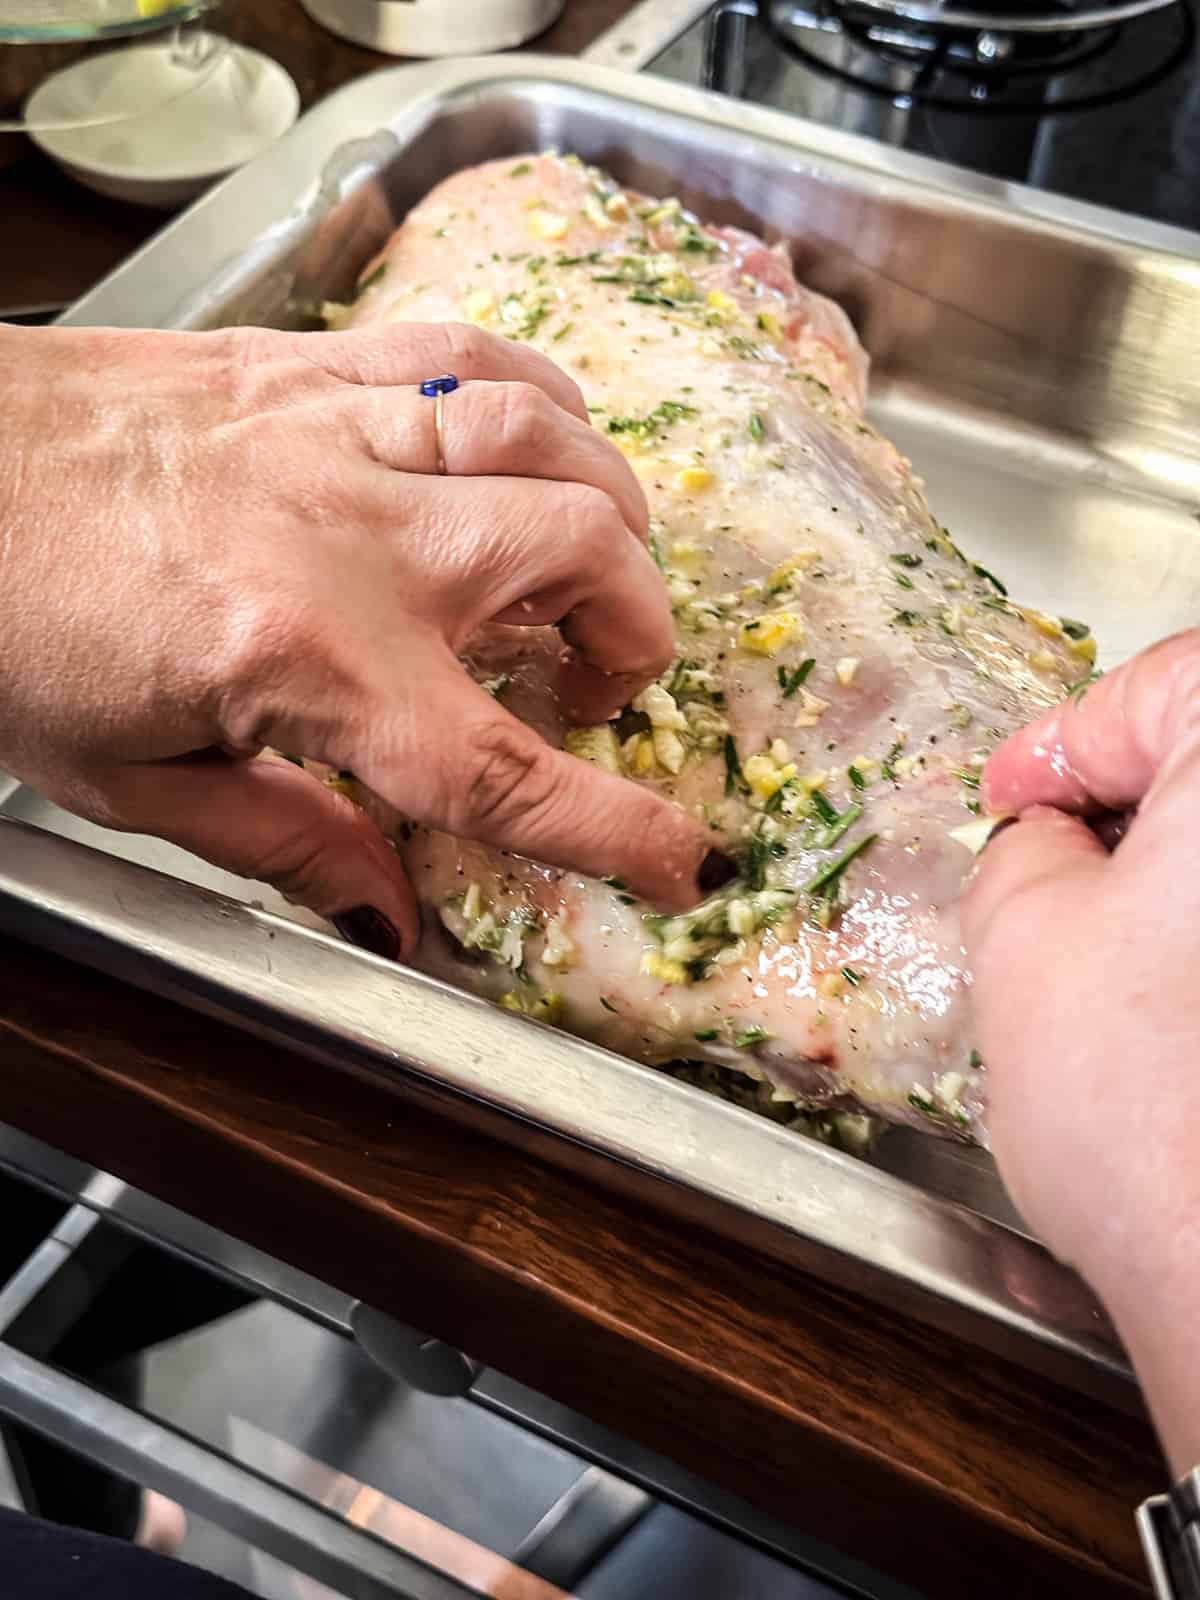 Hands rubbing marinade on a leg of lamb in a roasting pan on a kitchen counter.